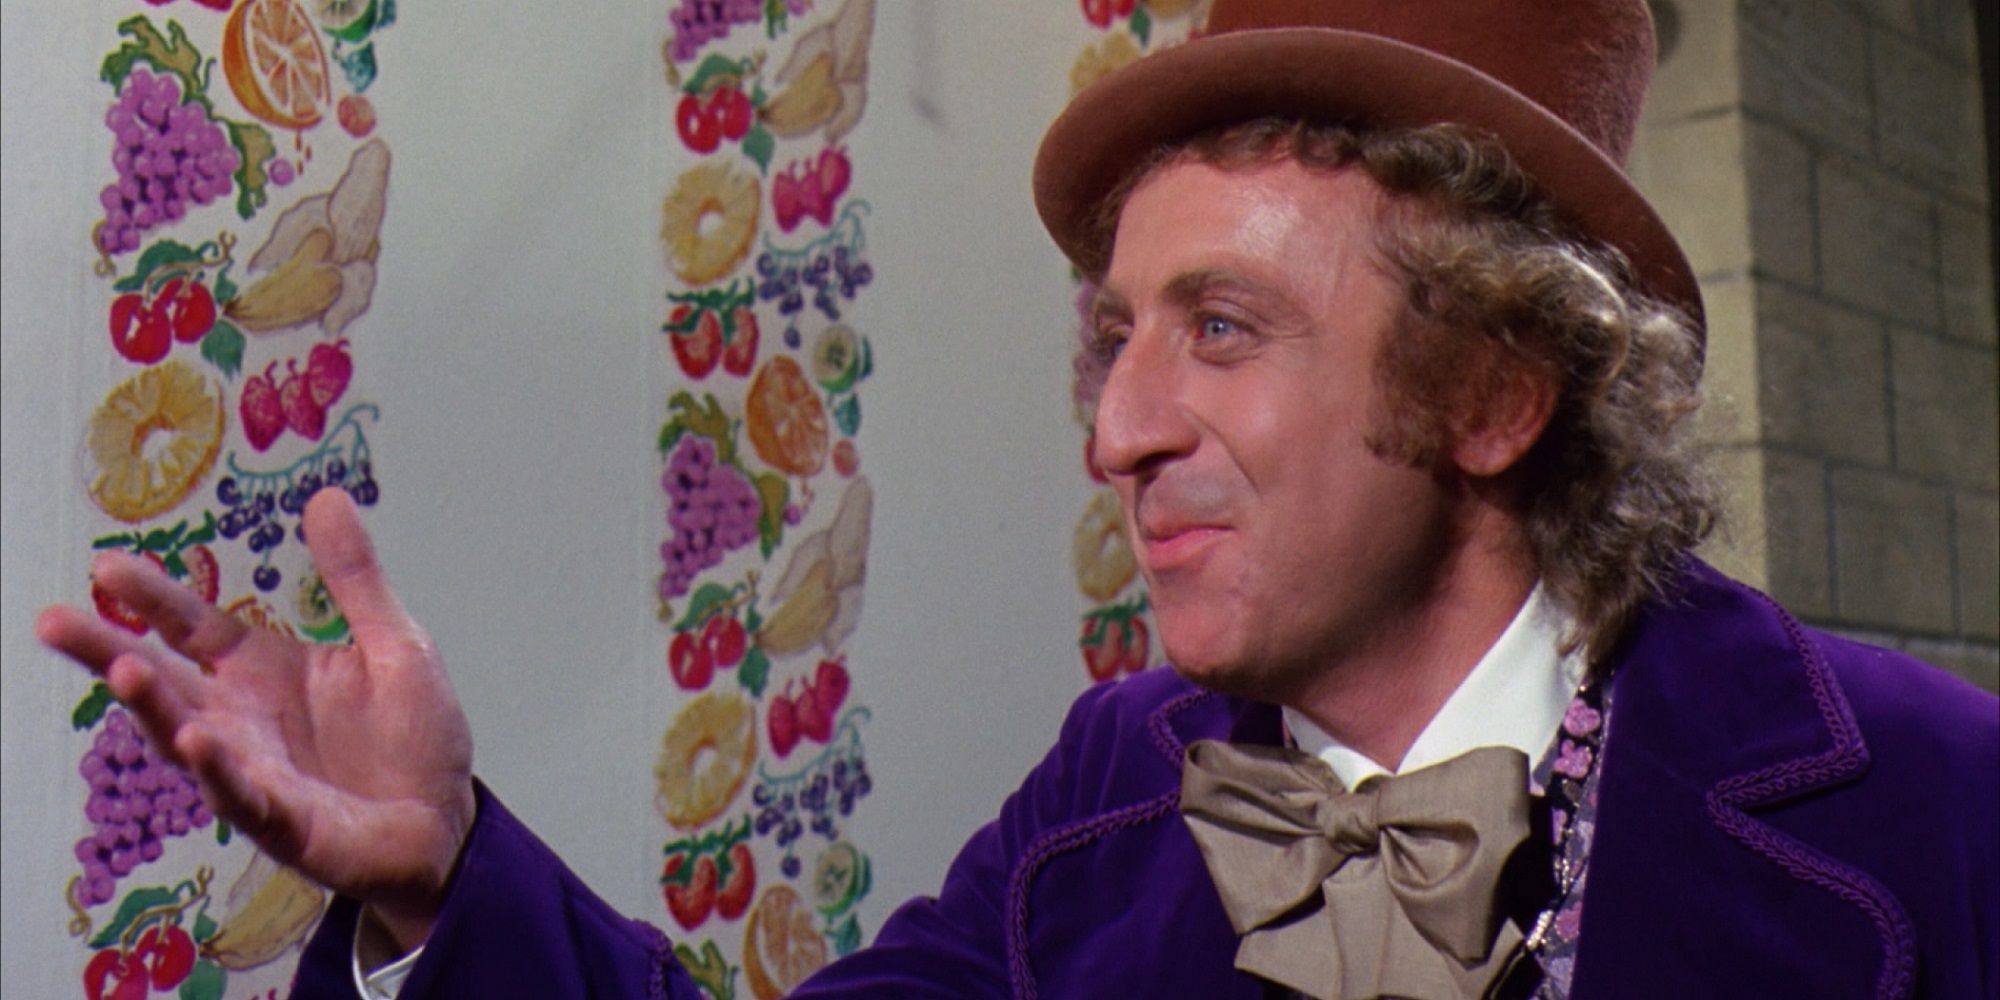 Gene Wilder as Willy Wonka in front of the flavored wallpaper in Willy Wonka and the Chocolate Factory